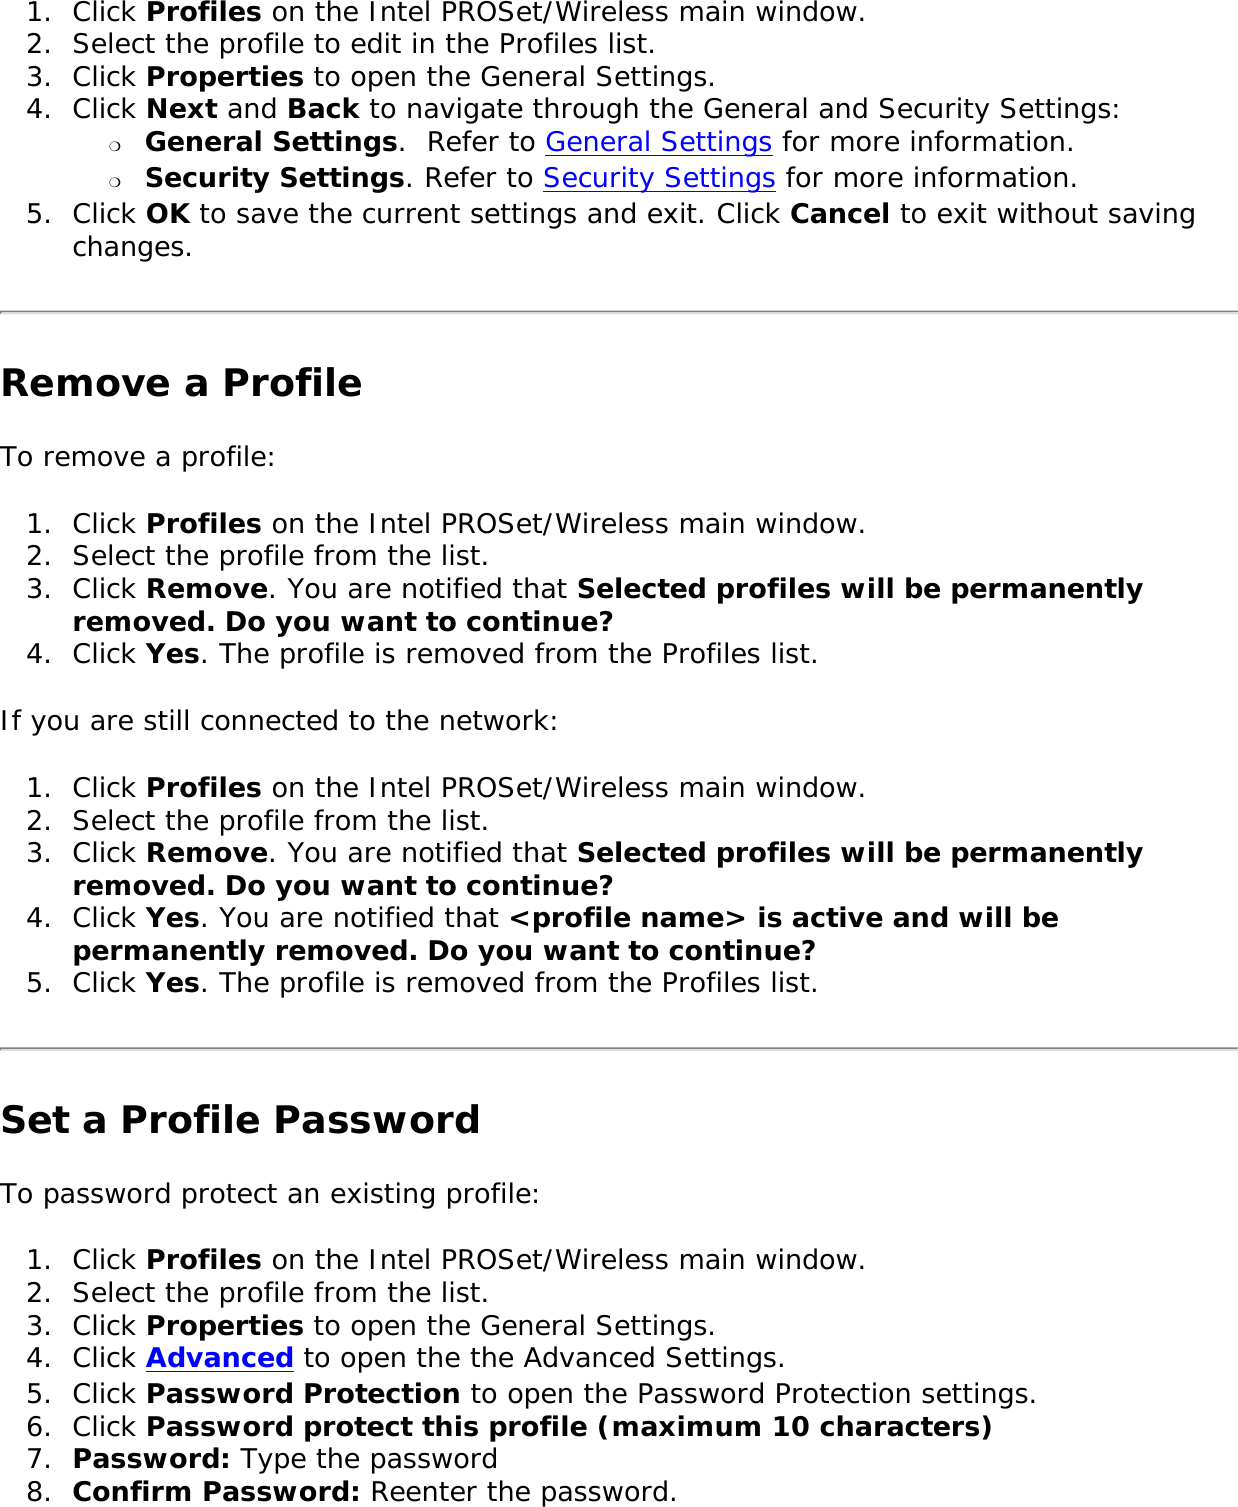 1.  Click Profiles on the Intel PROSet/Wireless main window.2.  Select the profile to edit in the Profiles list. 3.  Click Properties to open the General Settings. 4.  Click Next and Back to navigate through the General and Security Settings: ❍     General Settings.  Refer to General Settings for more information.❍     Security Settings. Refer to Security Settings for more information.5.  Click OK to save the current settings and exit. Click Cancel to exit without saving changes. Remove a ProfileTo remove a profile: 1.  Click Profiles on the Intel PROSet/Wireless main window.2.  Select the profile from the list.3.  Click Remove. You are notified that Selected profiles will be permanently removed. Do you want to continue? 4.  Click Yes. The profile is removed from the Profiles list. If you are still connected to the network: 1.  Click Profiles on the Intel PROSet/Wireless main window.2.  Select the profile from the list.3.  Click Remove. You are notified that Selected profiles will be permanently removed. Do you want to continue?4.  Click Yes. You are notified that &lt;profile name&gt; is active and will be permanently removed. Do you want to continue? 5.  Click Yes. The profile is removed from the Profiles list. Set a Profile PasswordTo password protect an existing profile: 1.  Click Profiles on the Intel PROSet/Wireless main window.2.  Select the profile from the list.3.  Click Properties to open the General Settings. 4.  Click Advanced to open the the Advanced Settings. 5.  Click Password Protection to open the Password Protection settings. 6.  Click Password protect this profile (maximum 10 characters)7.  Password: Type the password 8.  Confirm Password: Reenter the password.